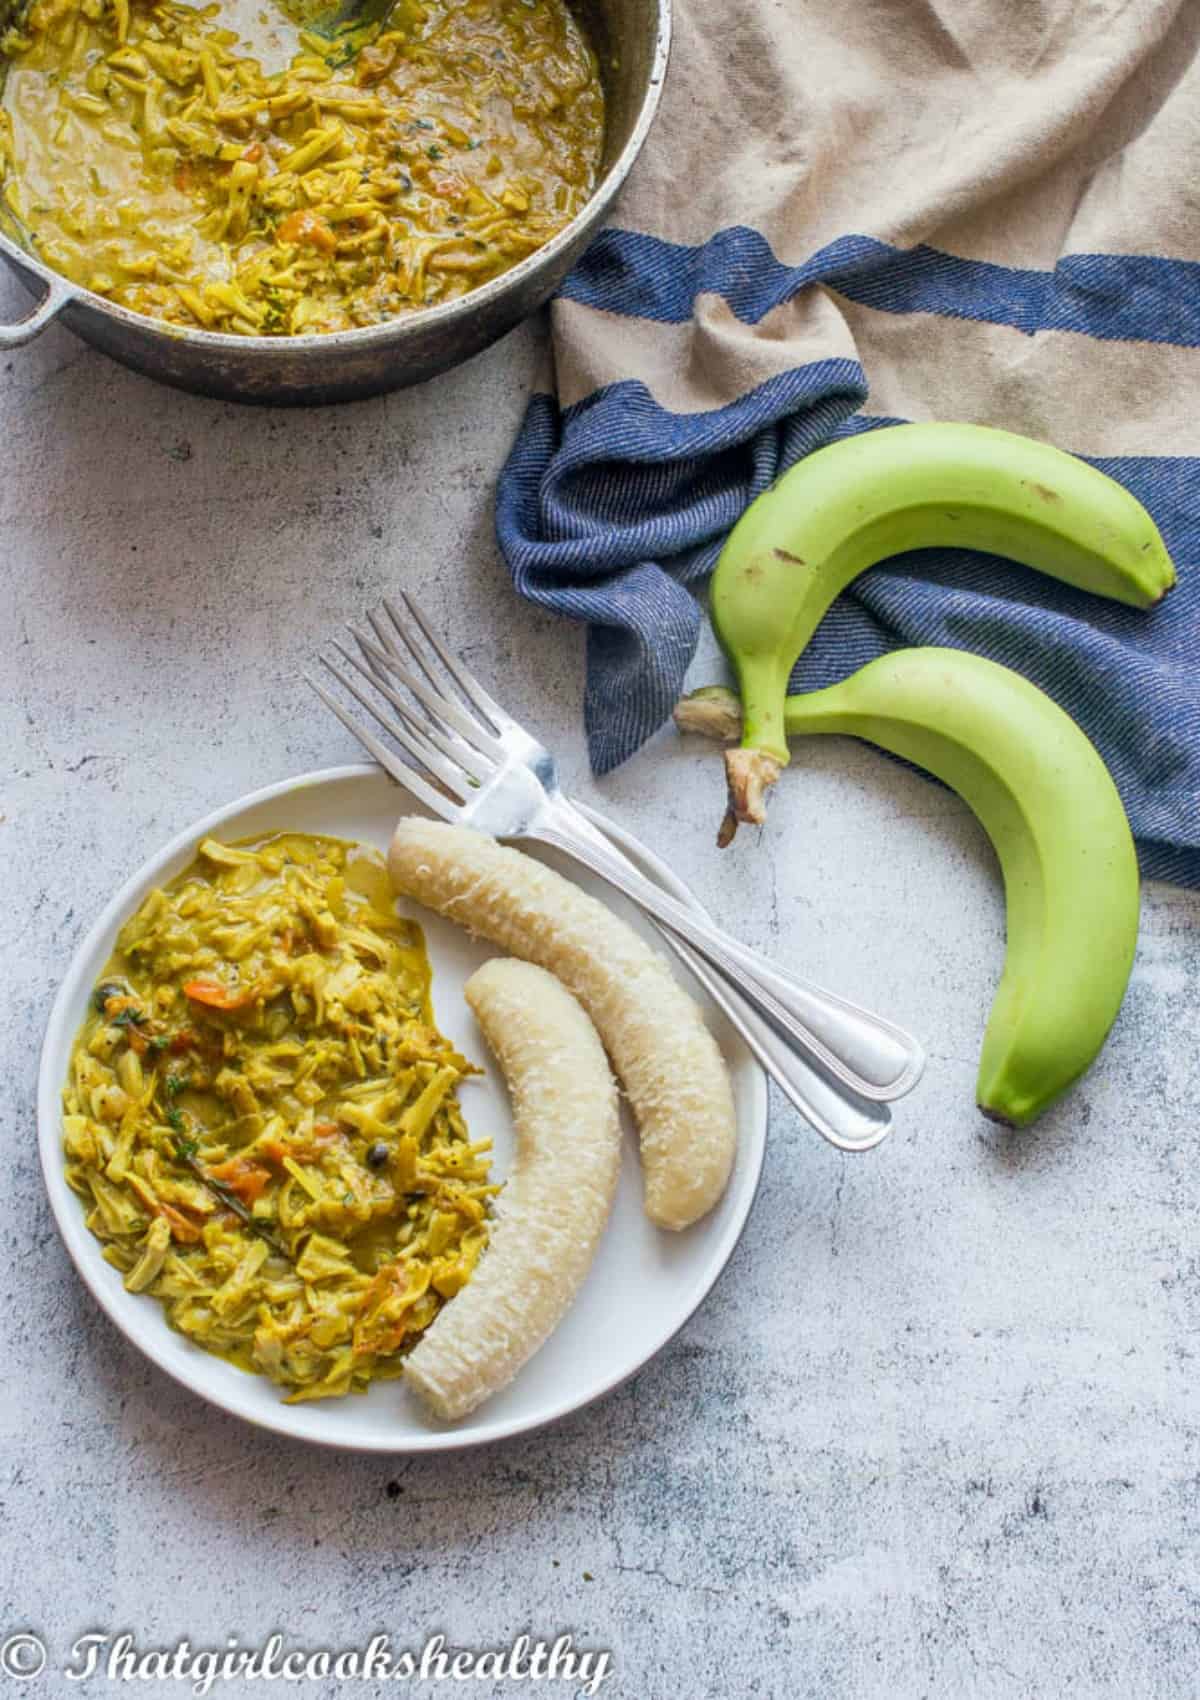 plate of food with green bananas